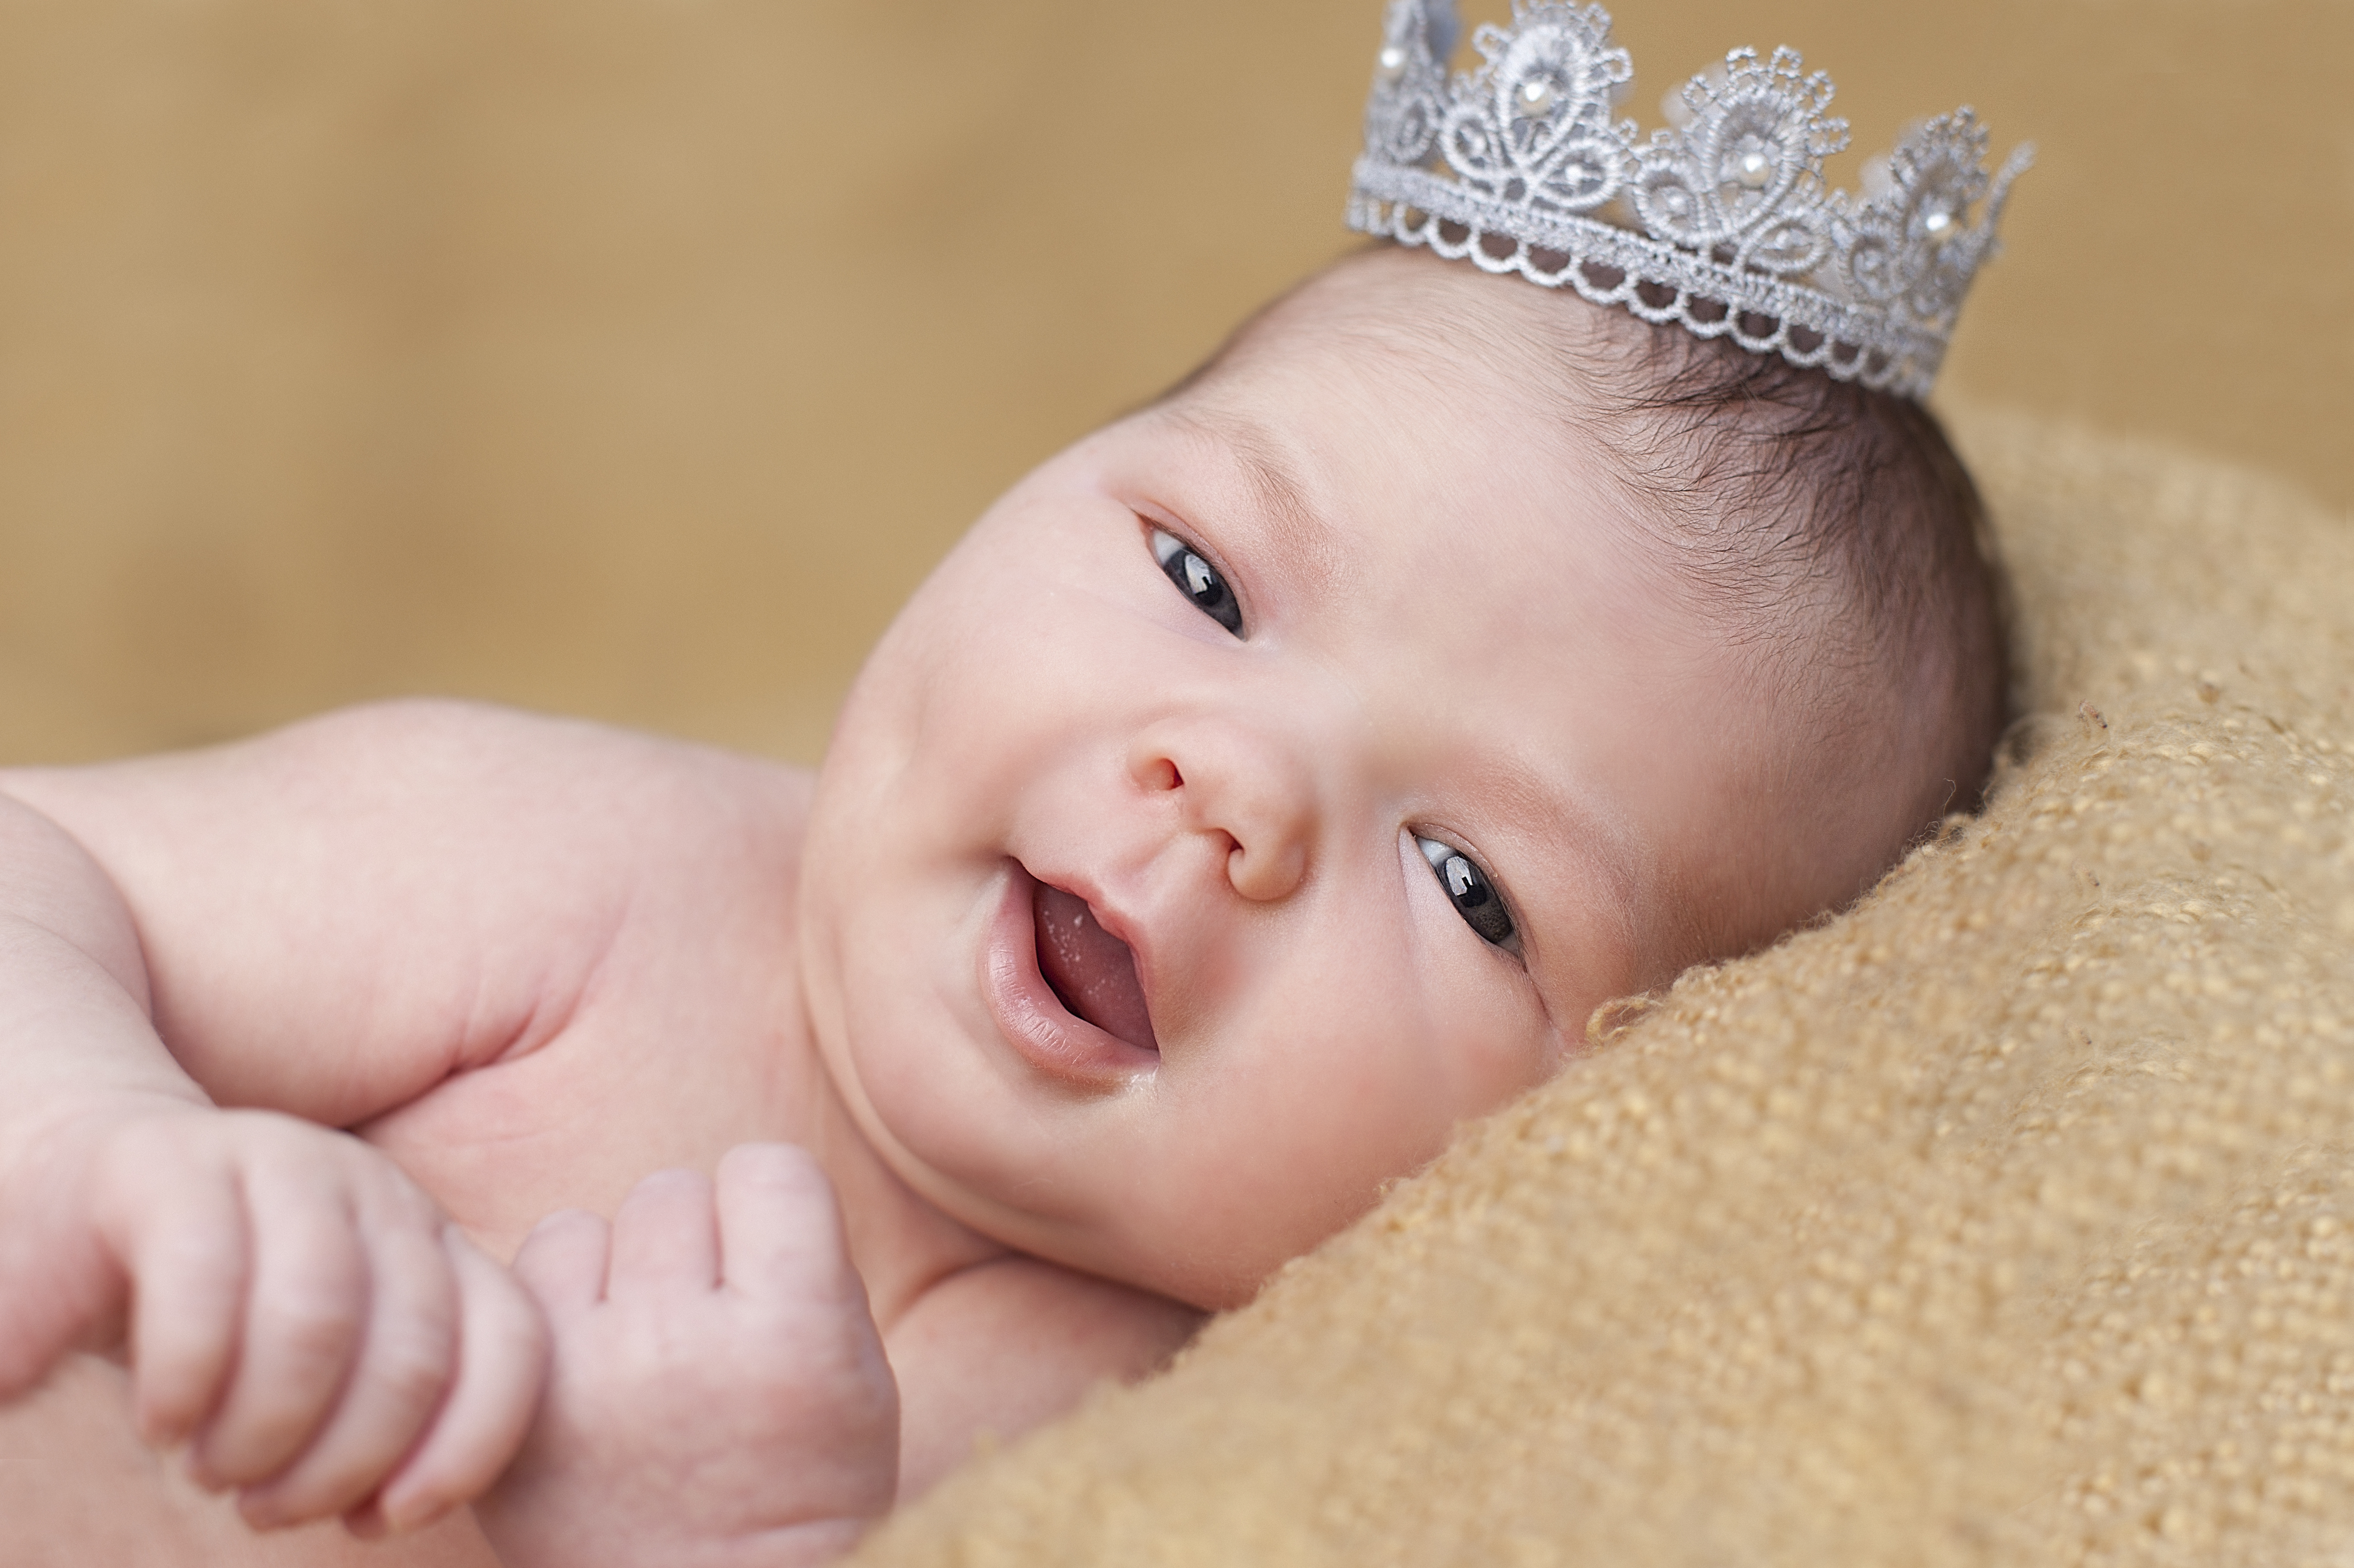 Don't be fooled by the crown. This is not the actual princess. Photo: Shutterstock/SDJ 